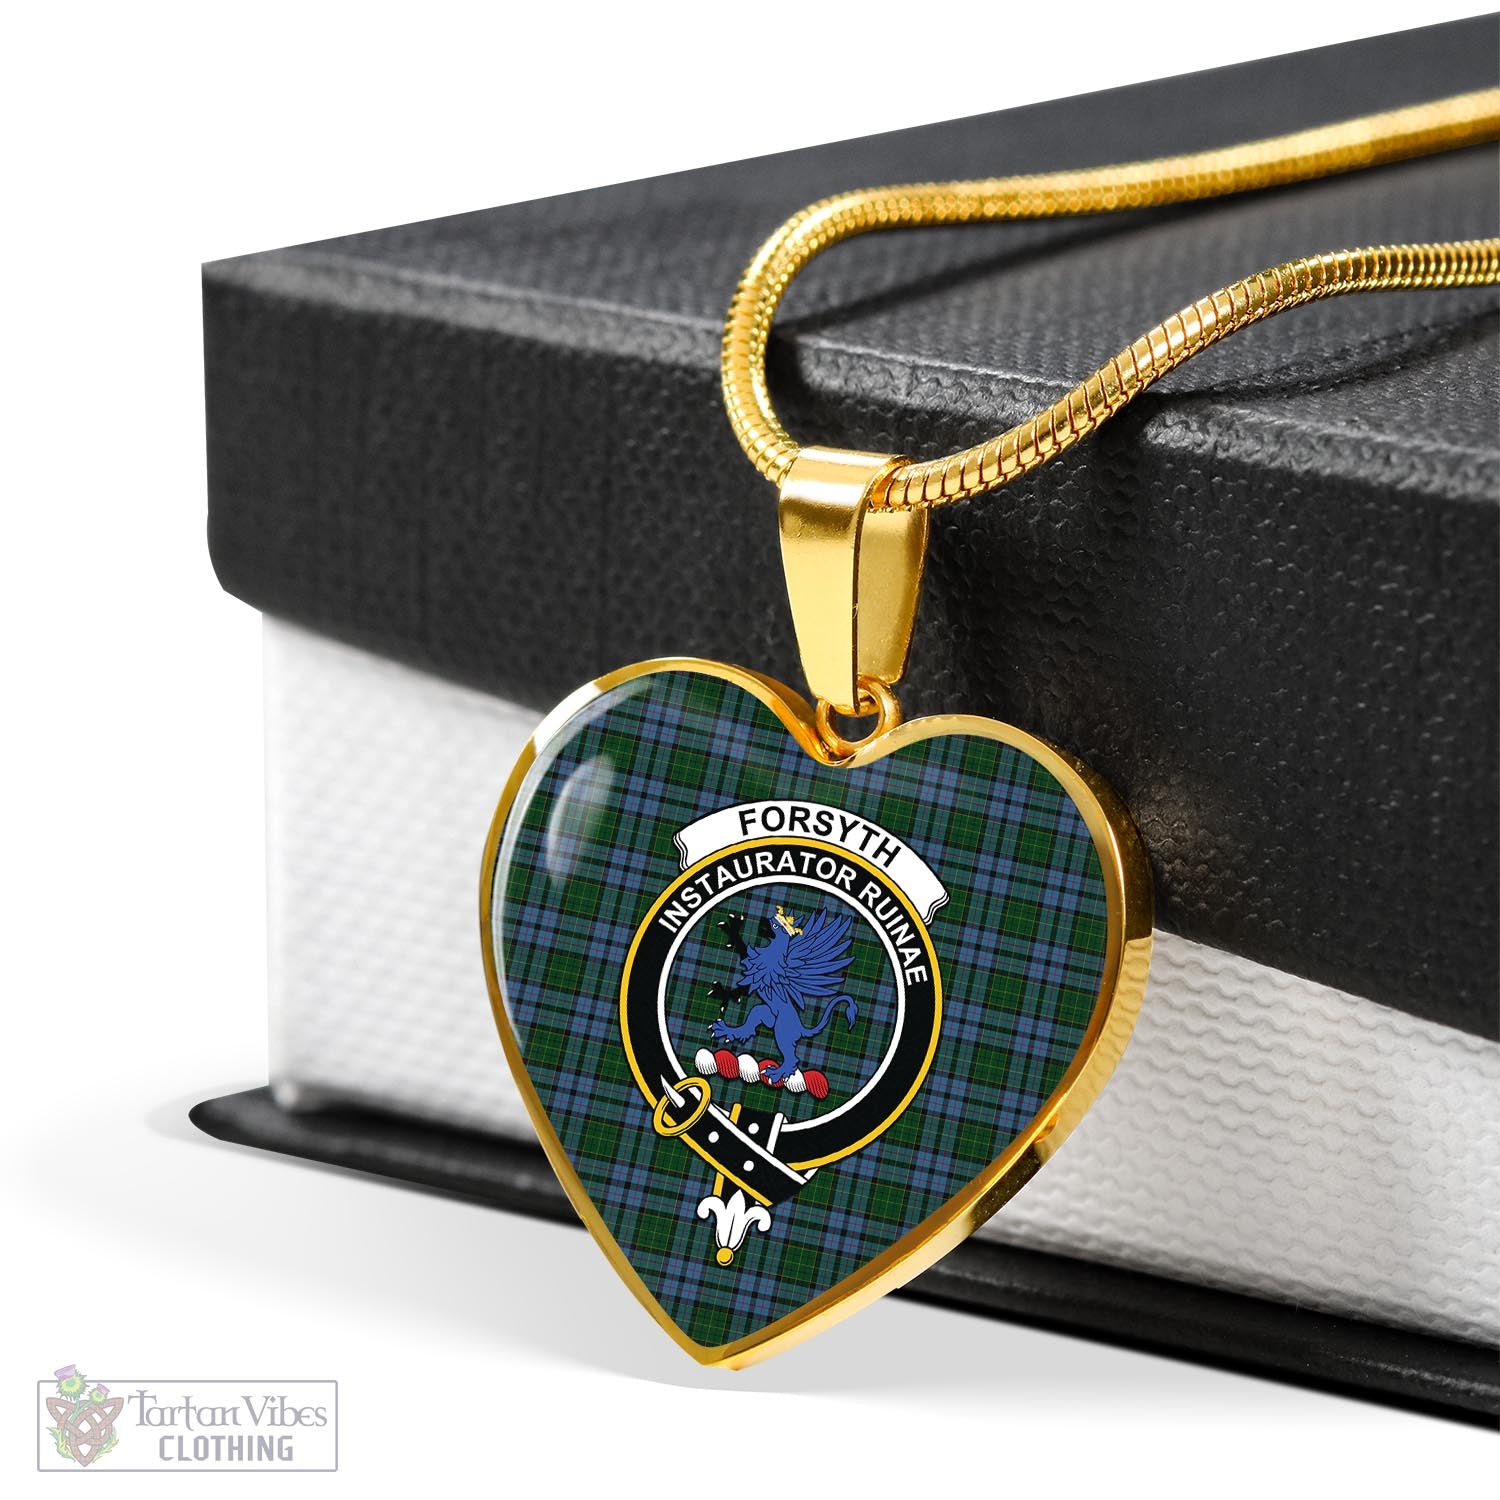 Tartan Vibes Clothing Forsyth Tartan Heart Necklace with Family Crest